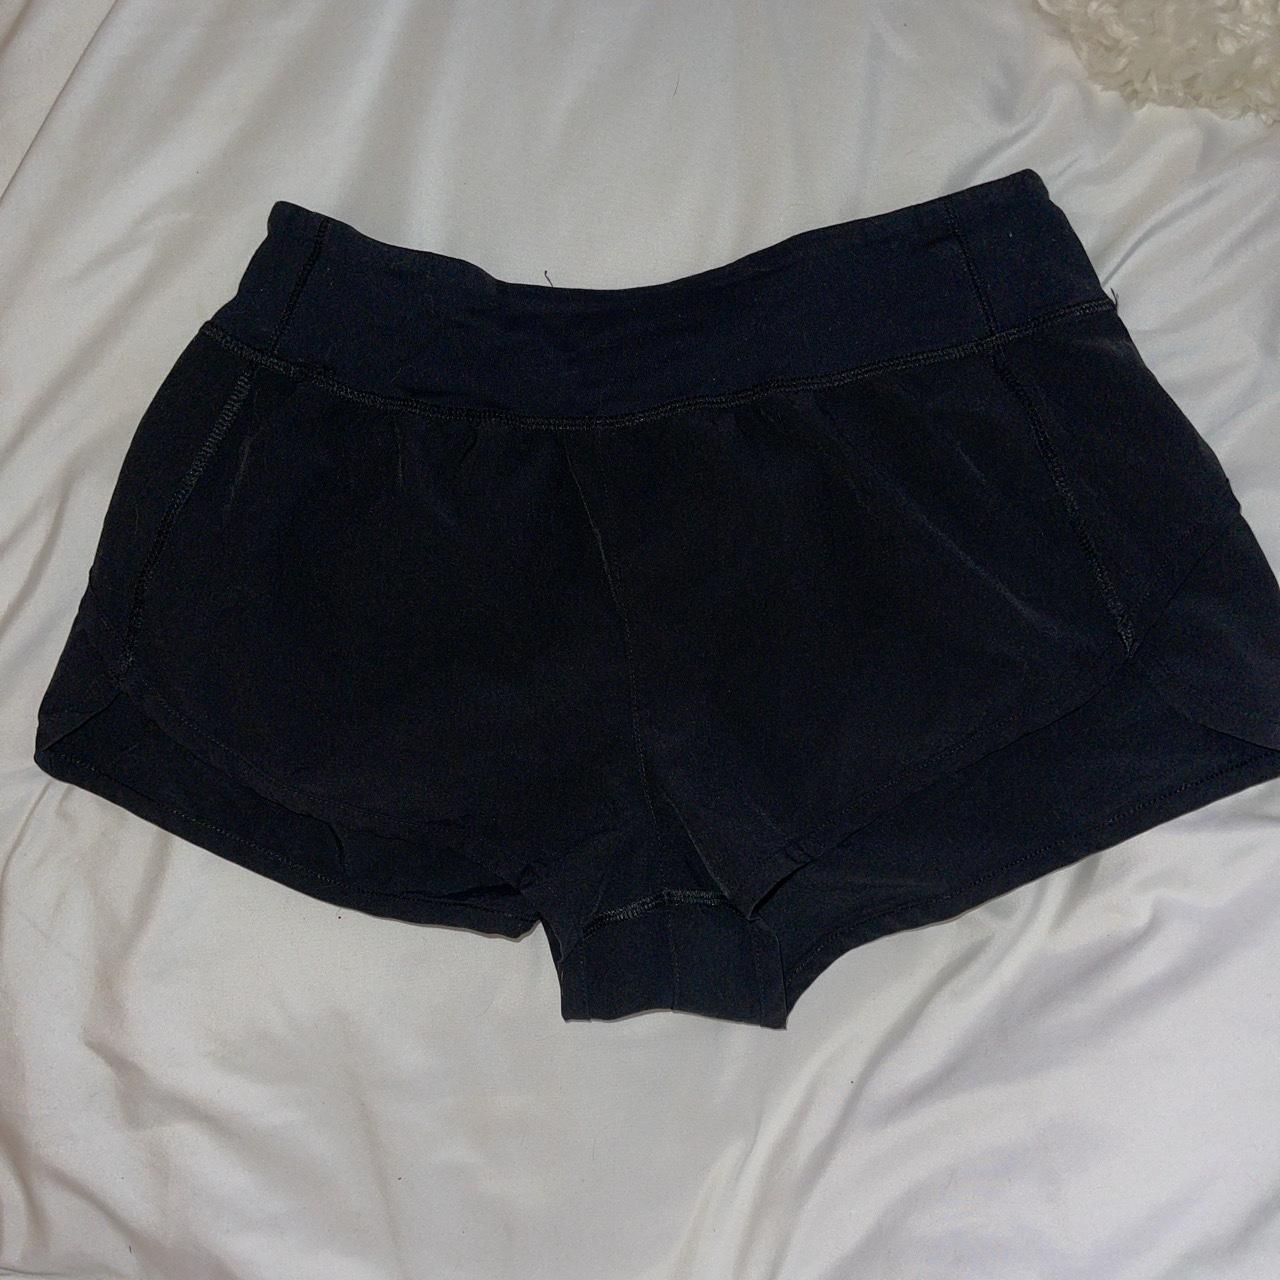 Athletic shorts has built in underwear and pocket - Depop